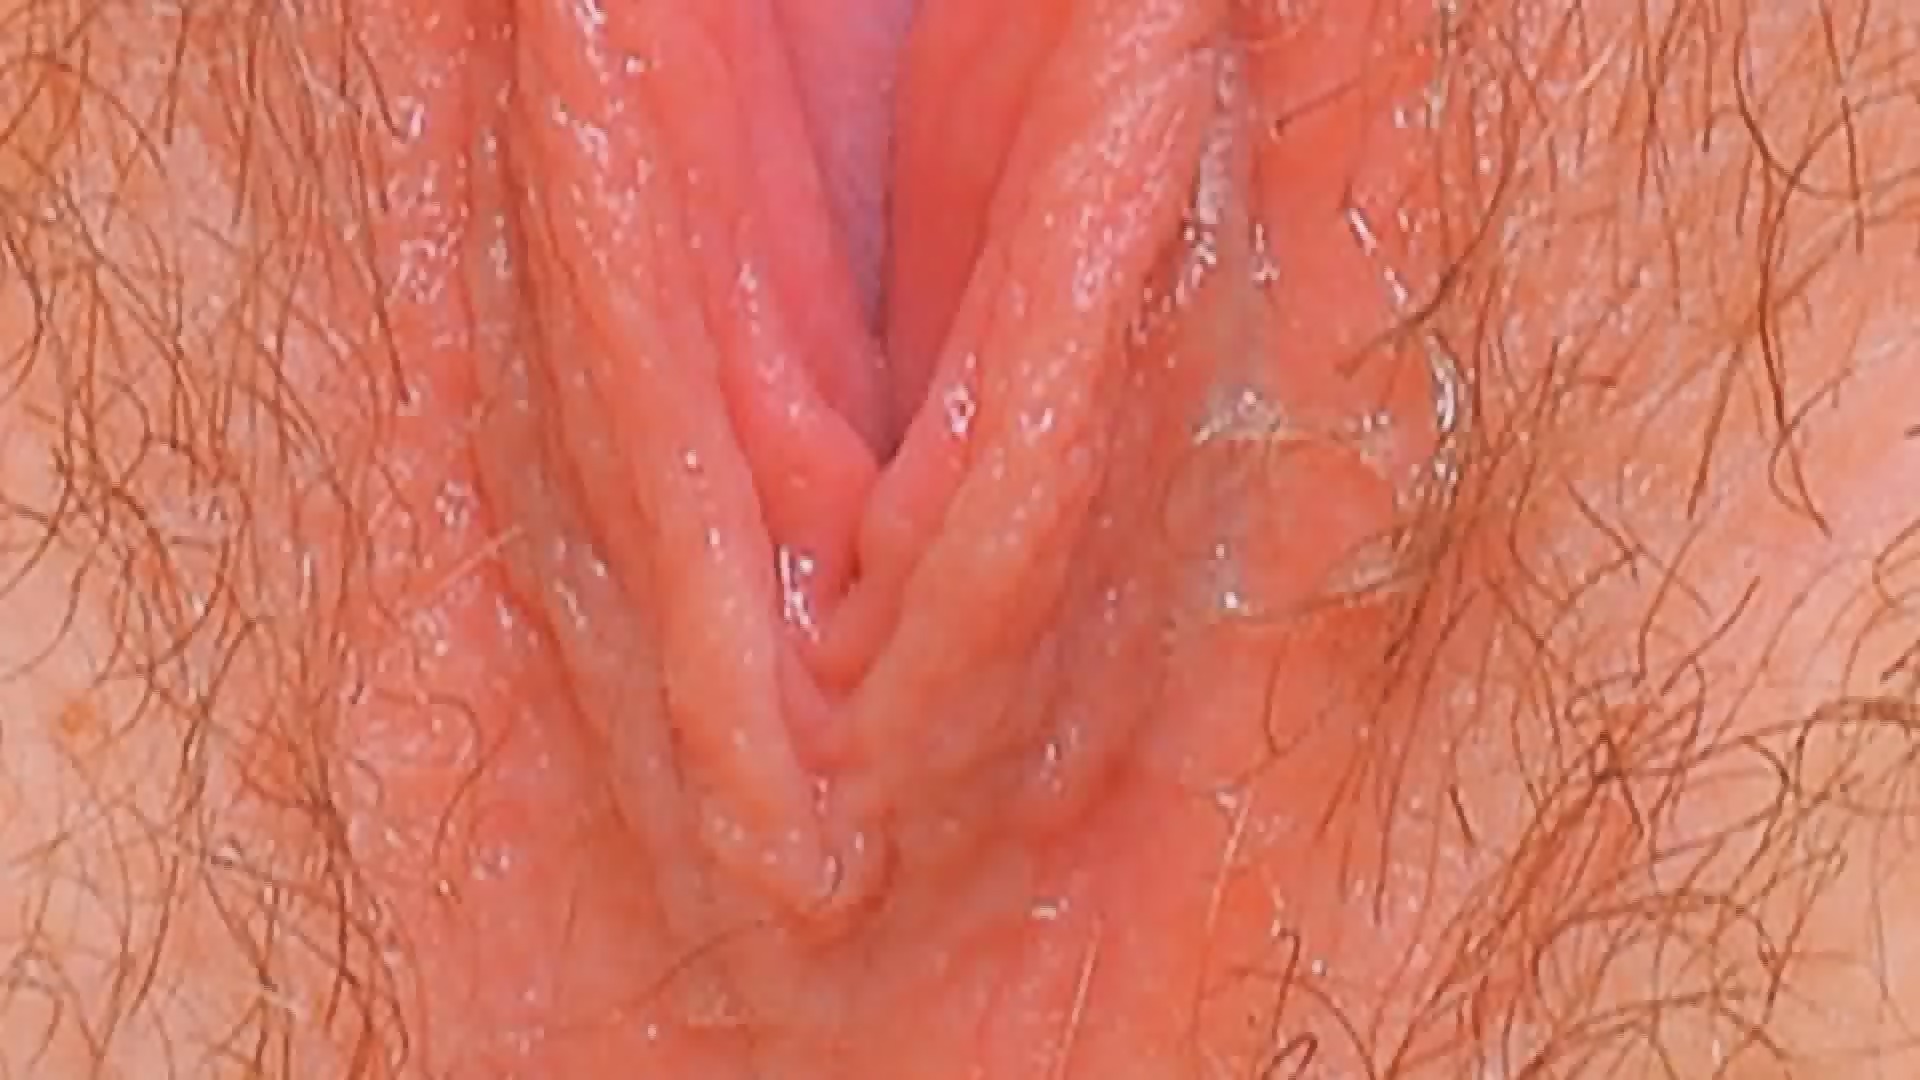 Female Textures Kiss Me Hd 1080p Vagina Close Up Hairy Sex Pussy